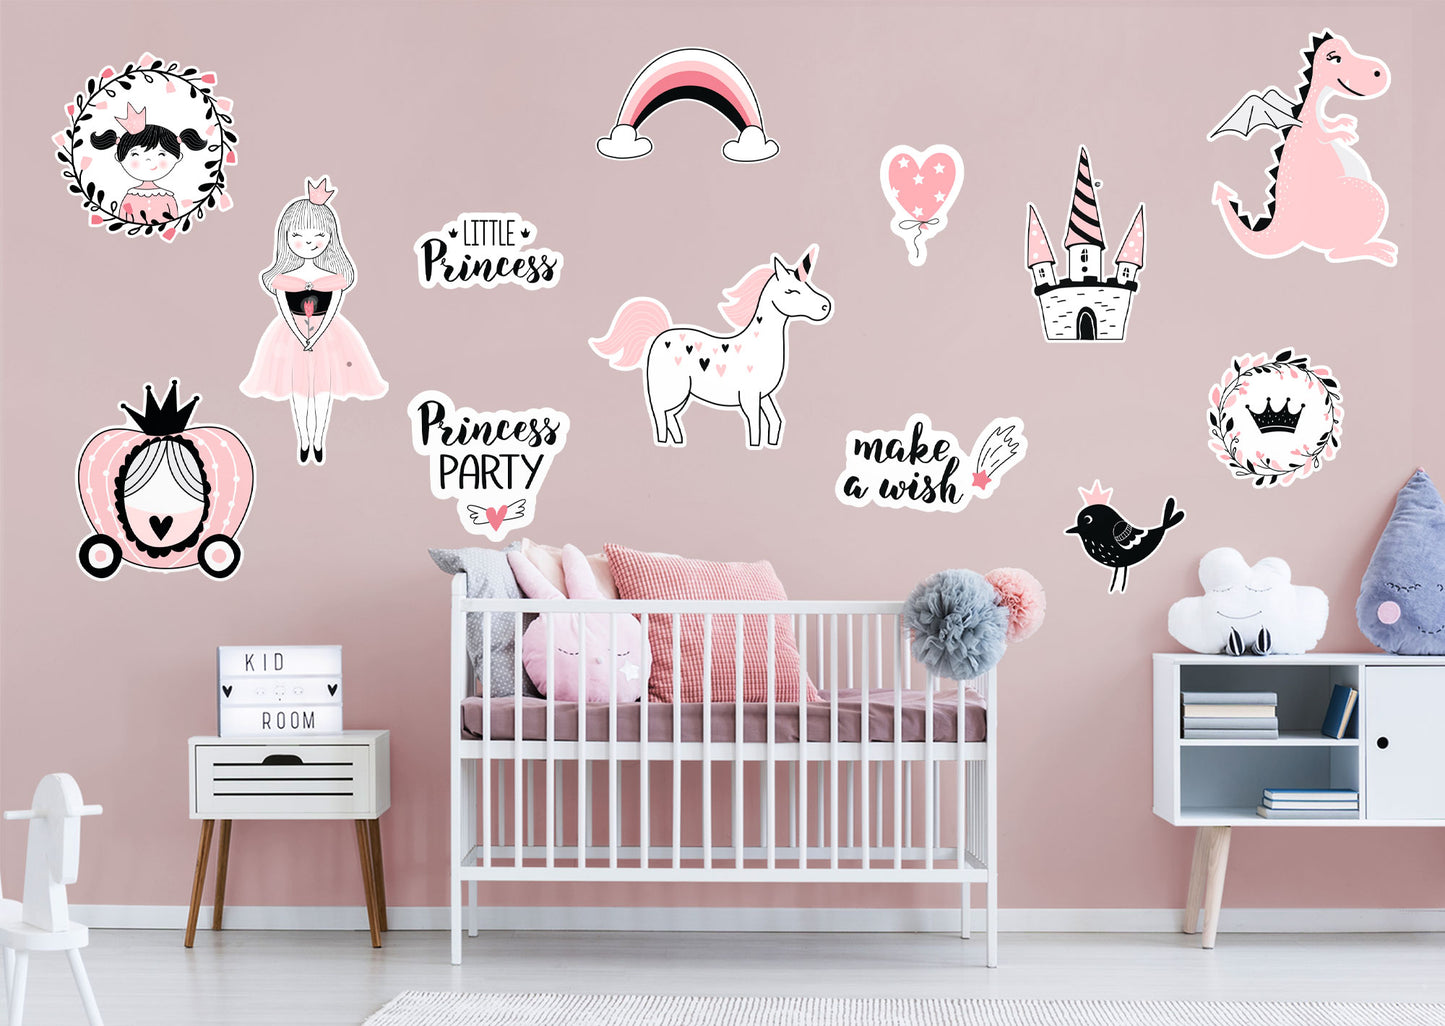 Nursery:  Little Princess Collection        -   Removable Wall   Adhesive Decal